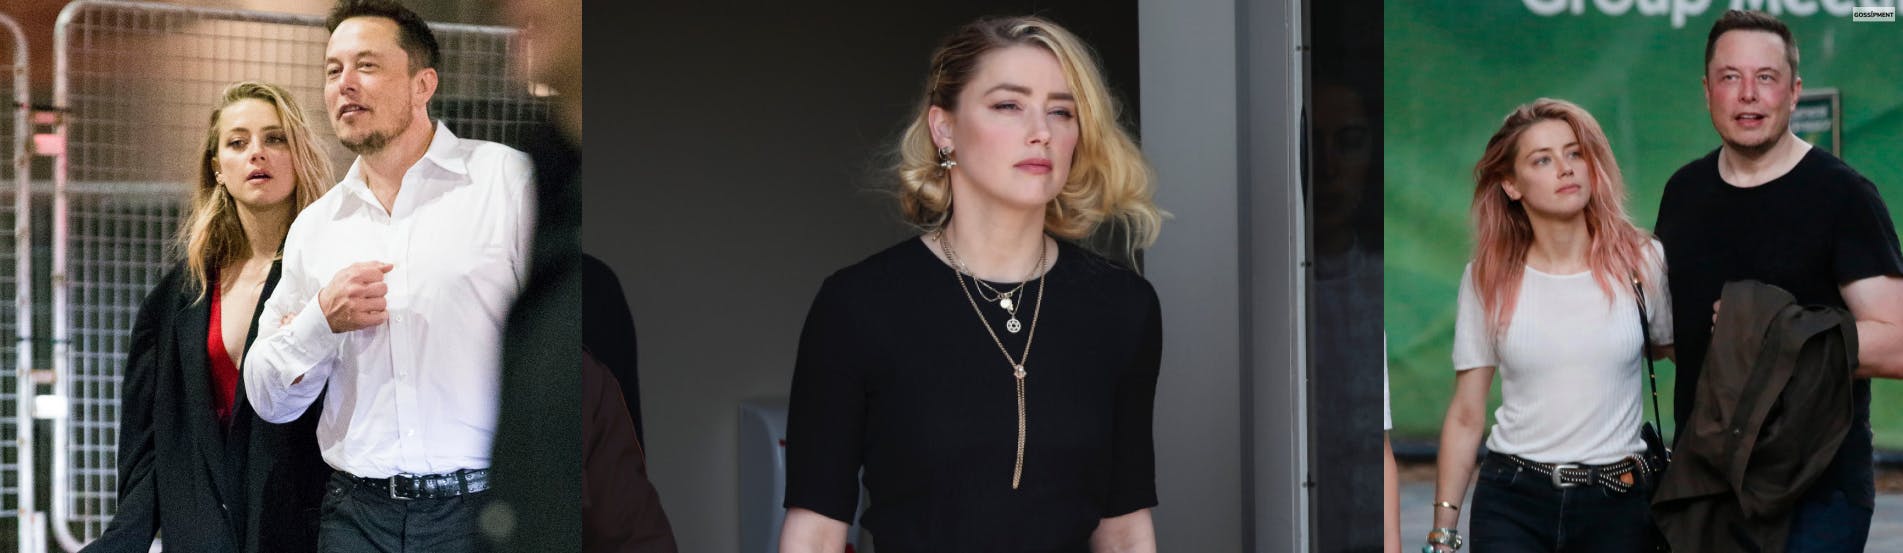 Cover Image for Amber Heard Did Not Agree With Elon Musk For Sharing Her Cosplay Photo